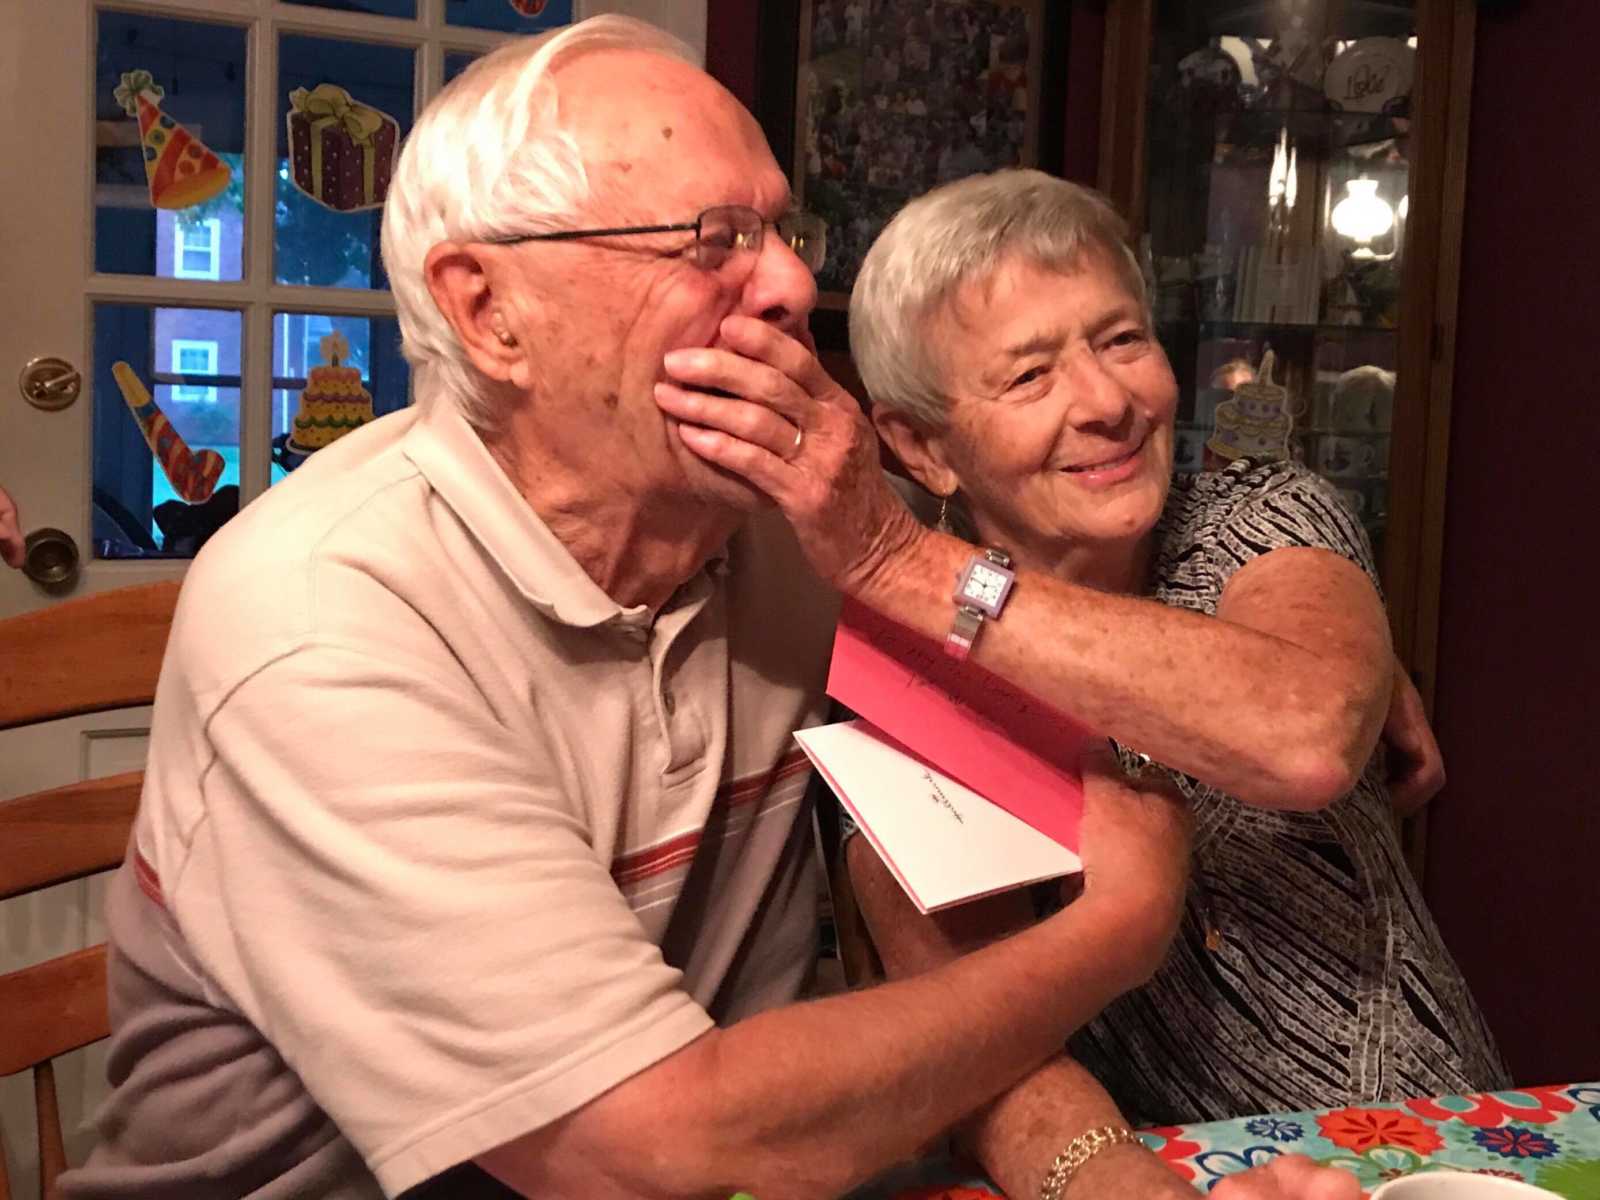 Elderly woman with dementia smiles while placing hand on the mouth of husband laughing